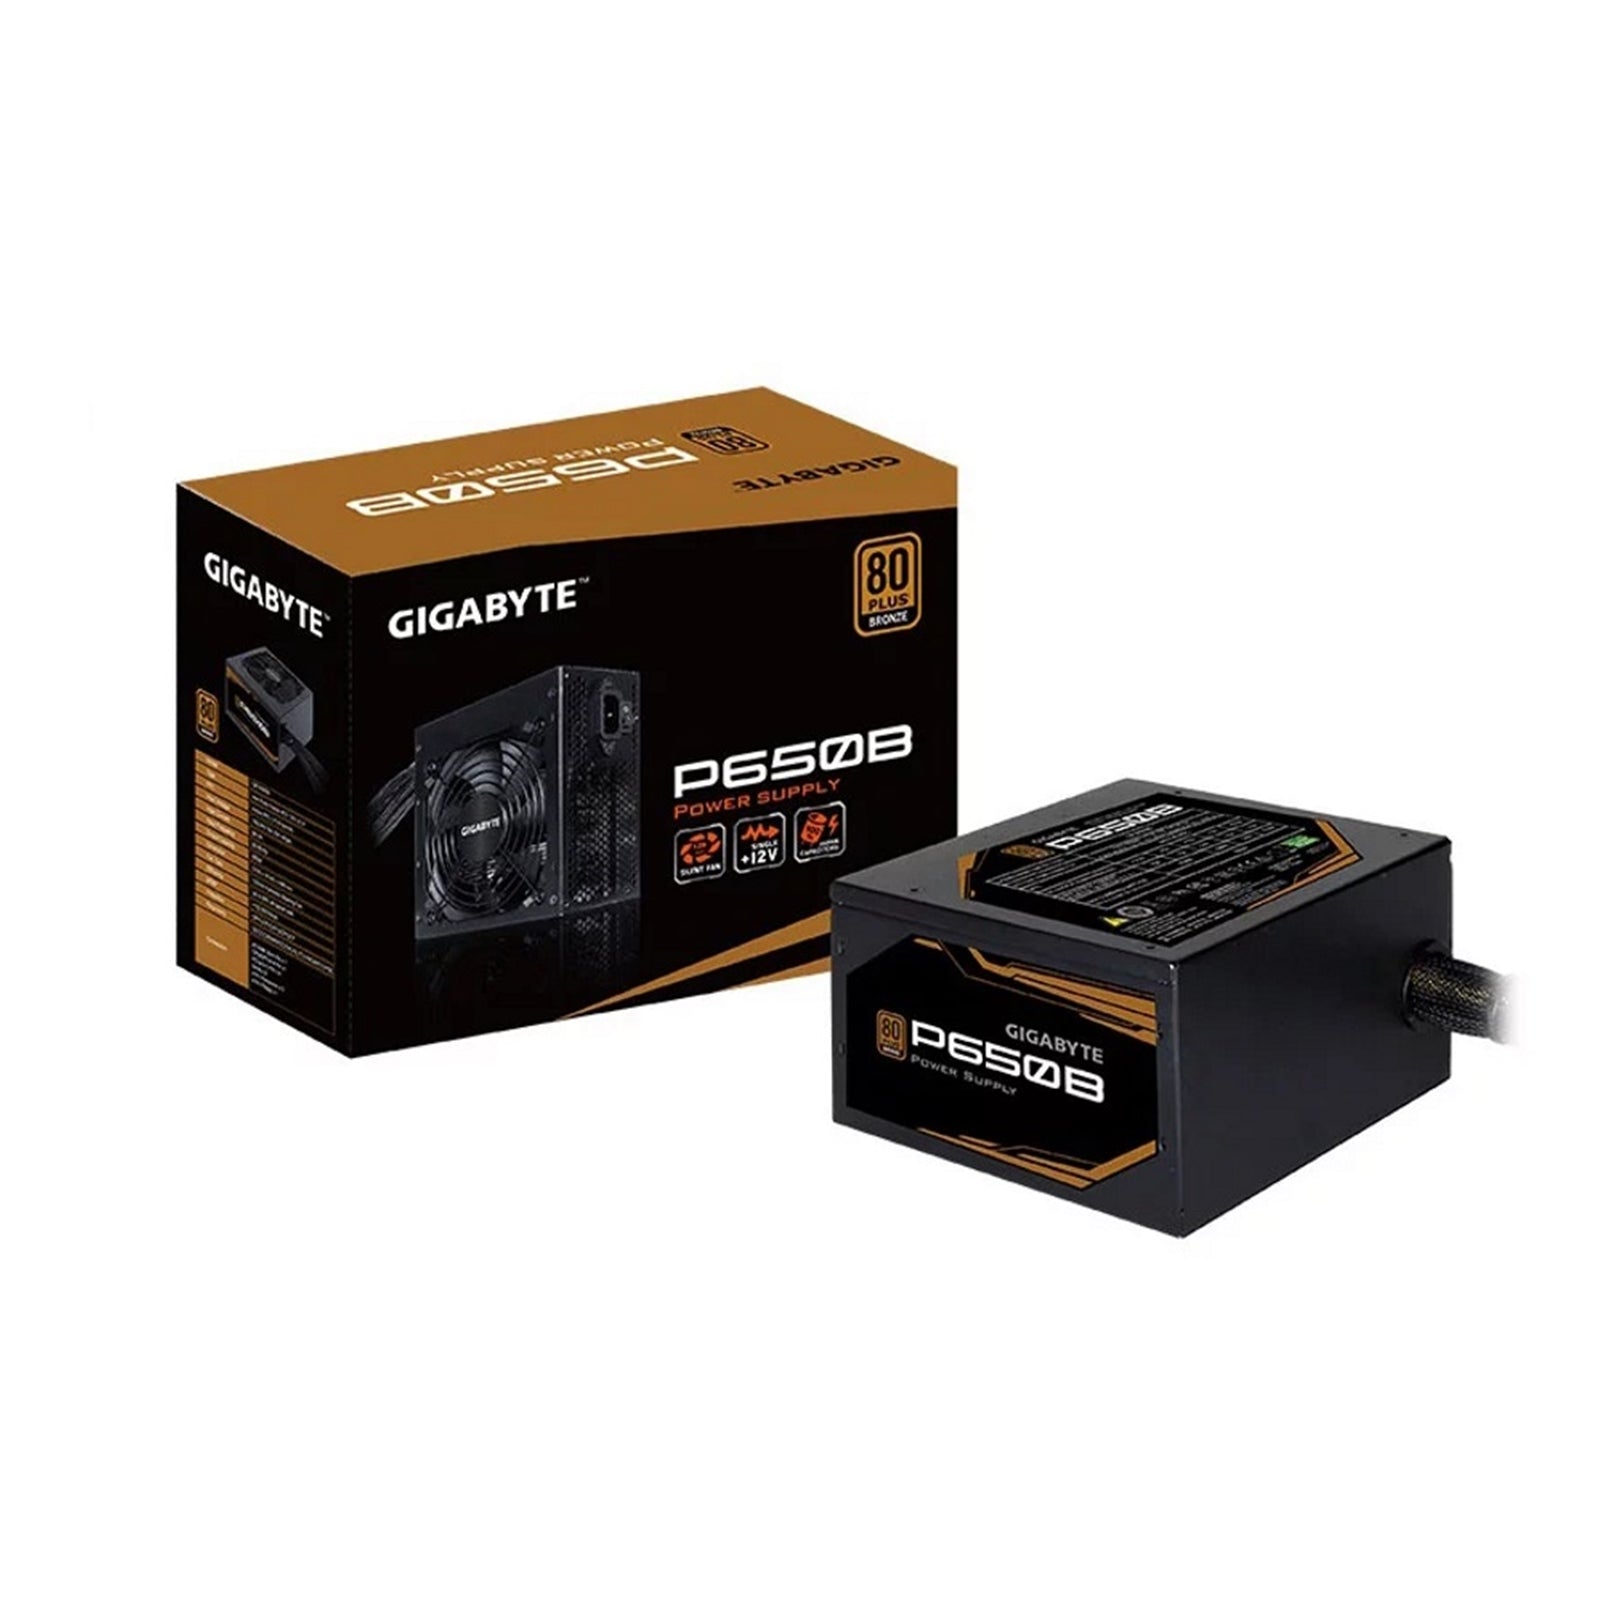 GIGABYTE P650B 650W Power Supply Efficient & Durable with Japanese Capacitors and Silent Fan